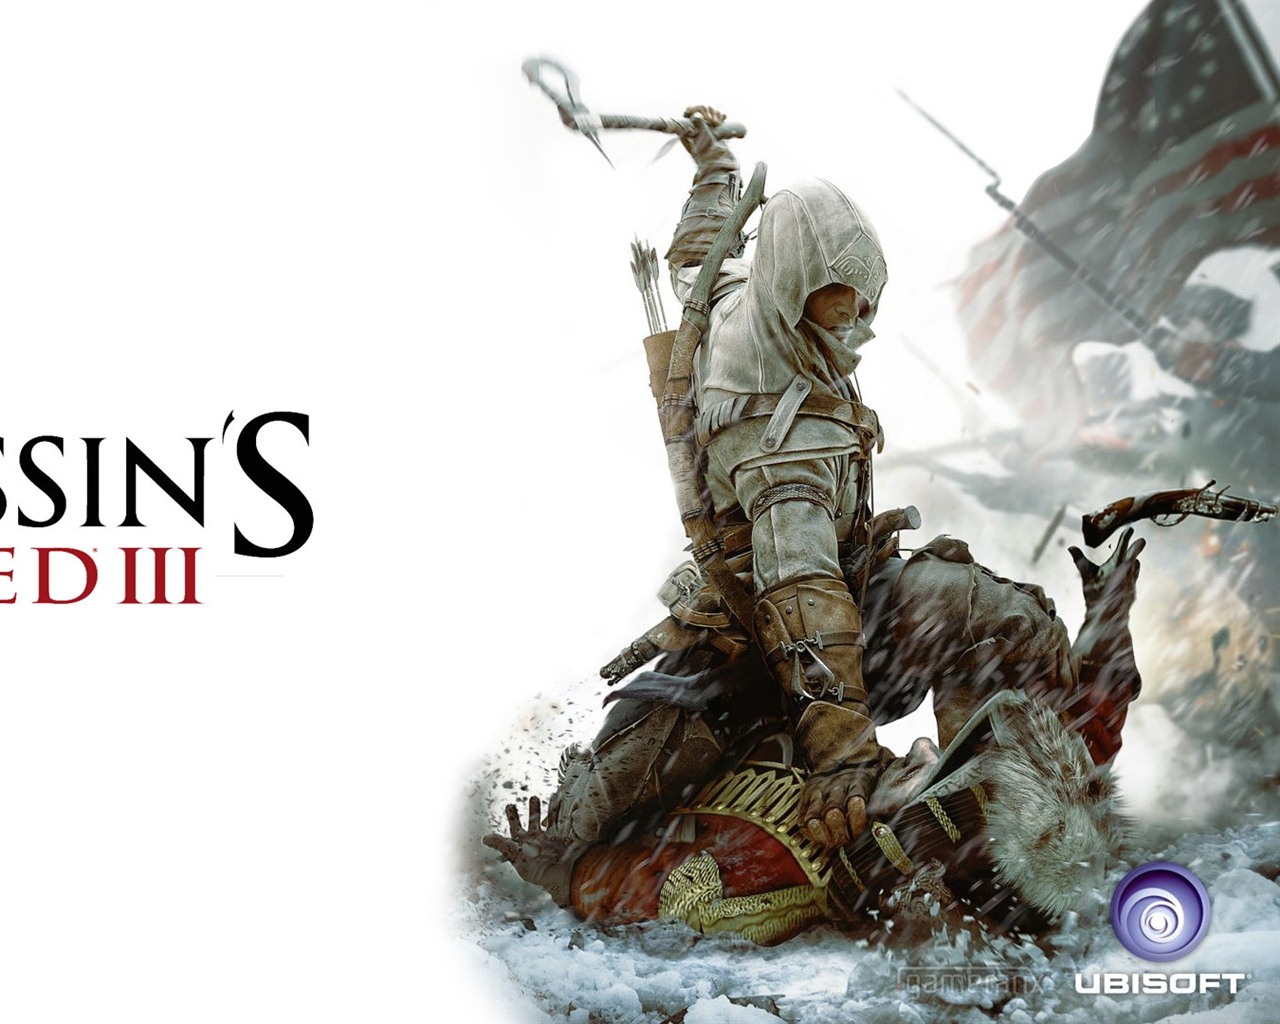 Assassin's Creed 3 HD wallpapers #13 - 1280x1024